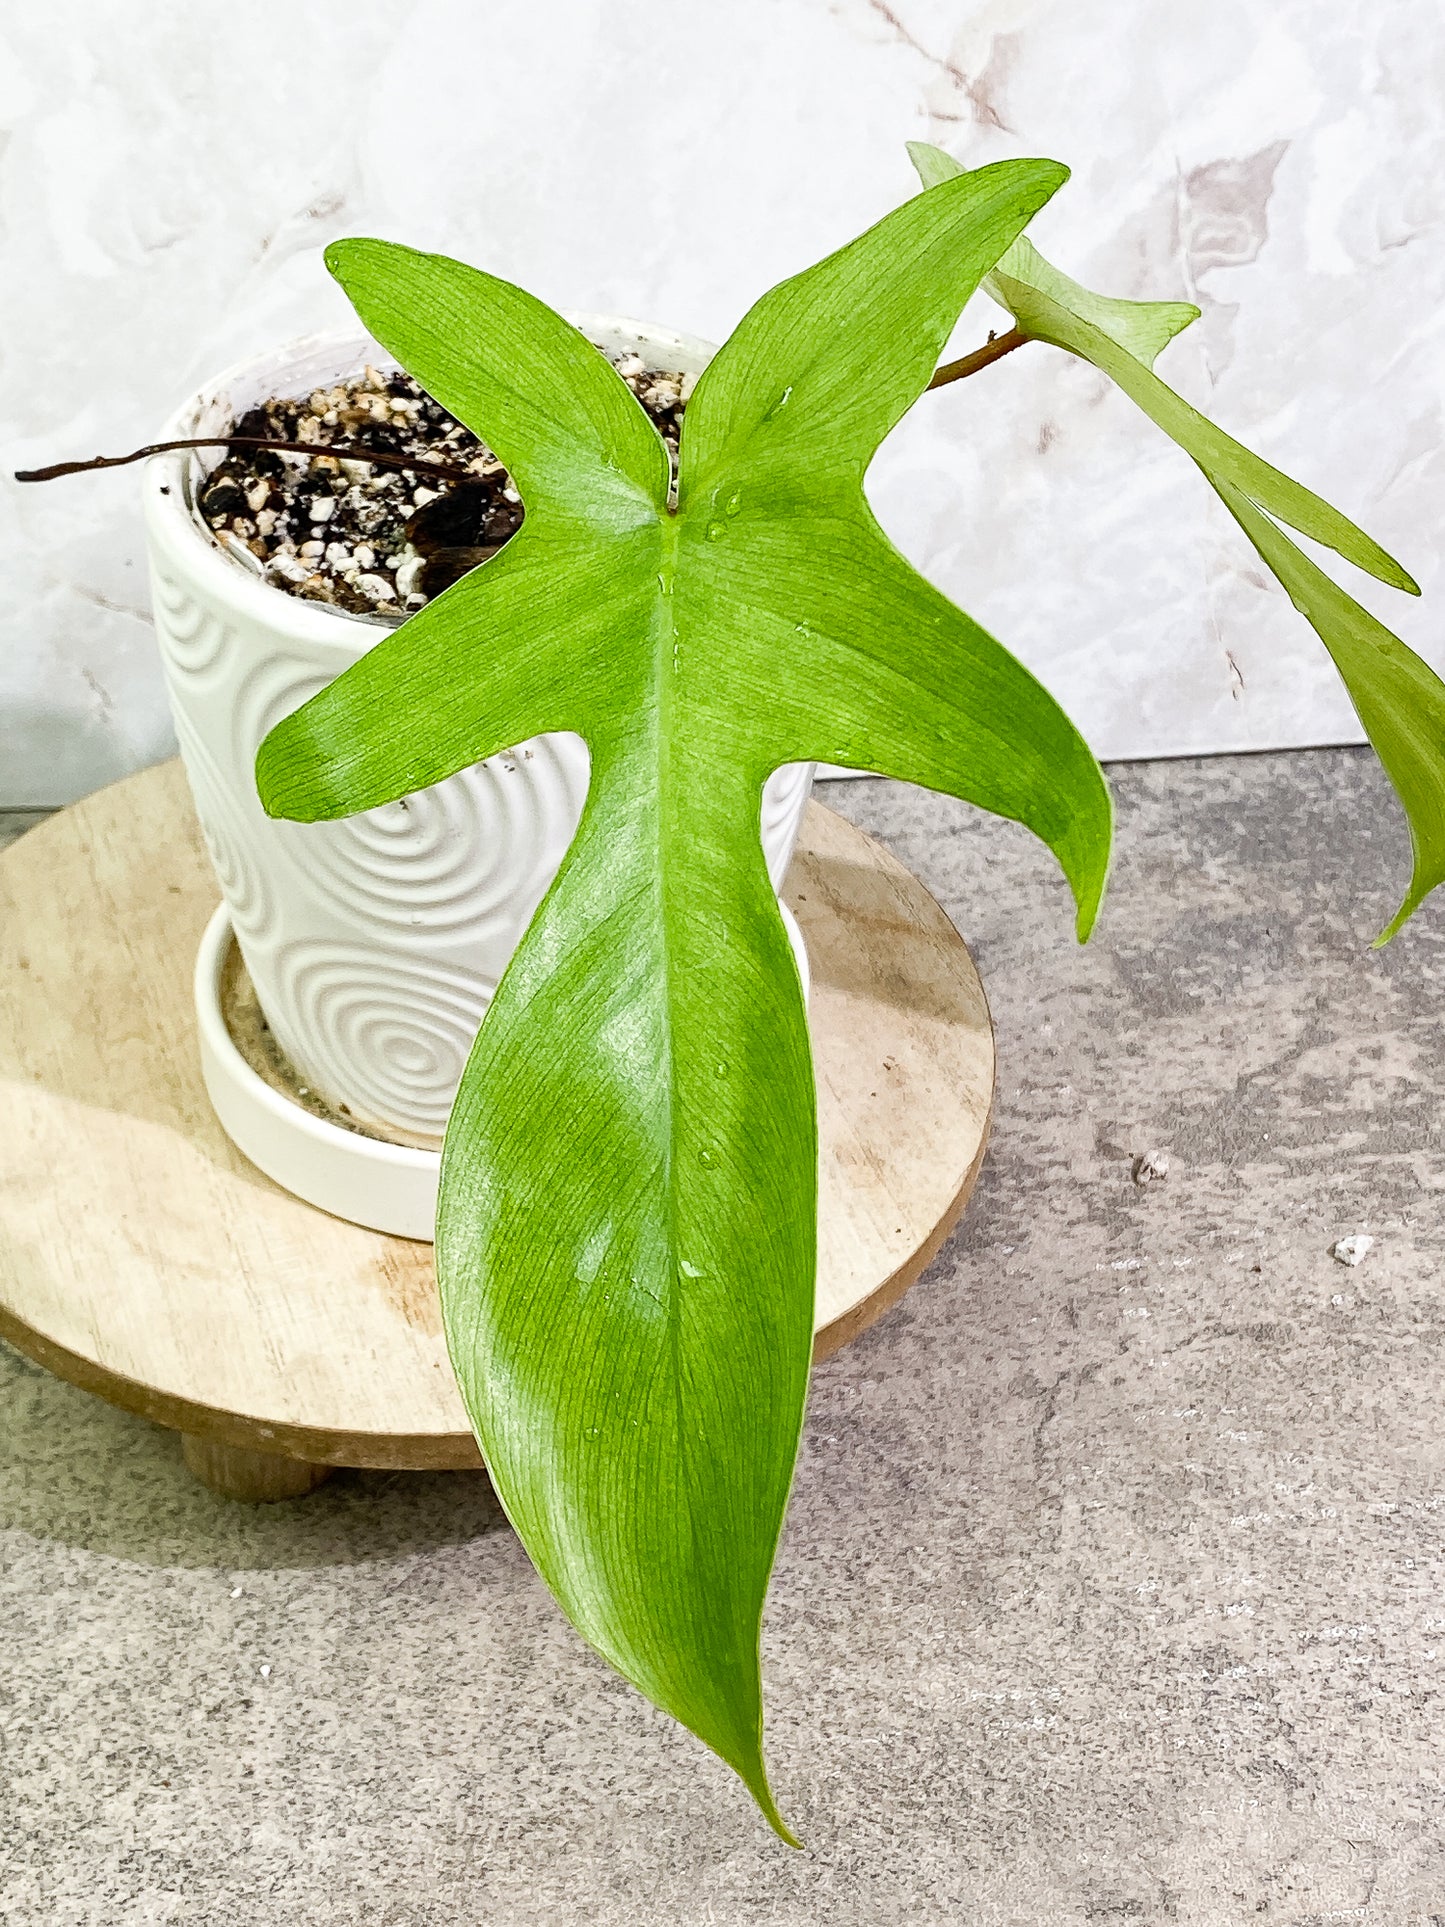 Philodendron Florida ghost mint 2 leaves 1 growing bud rooted